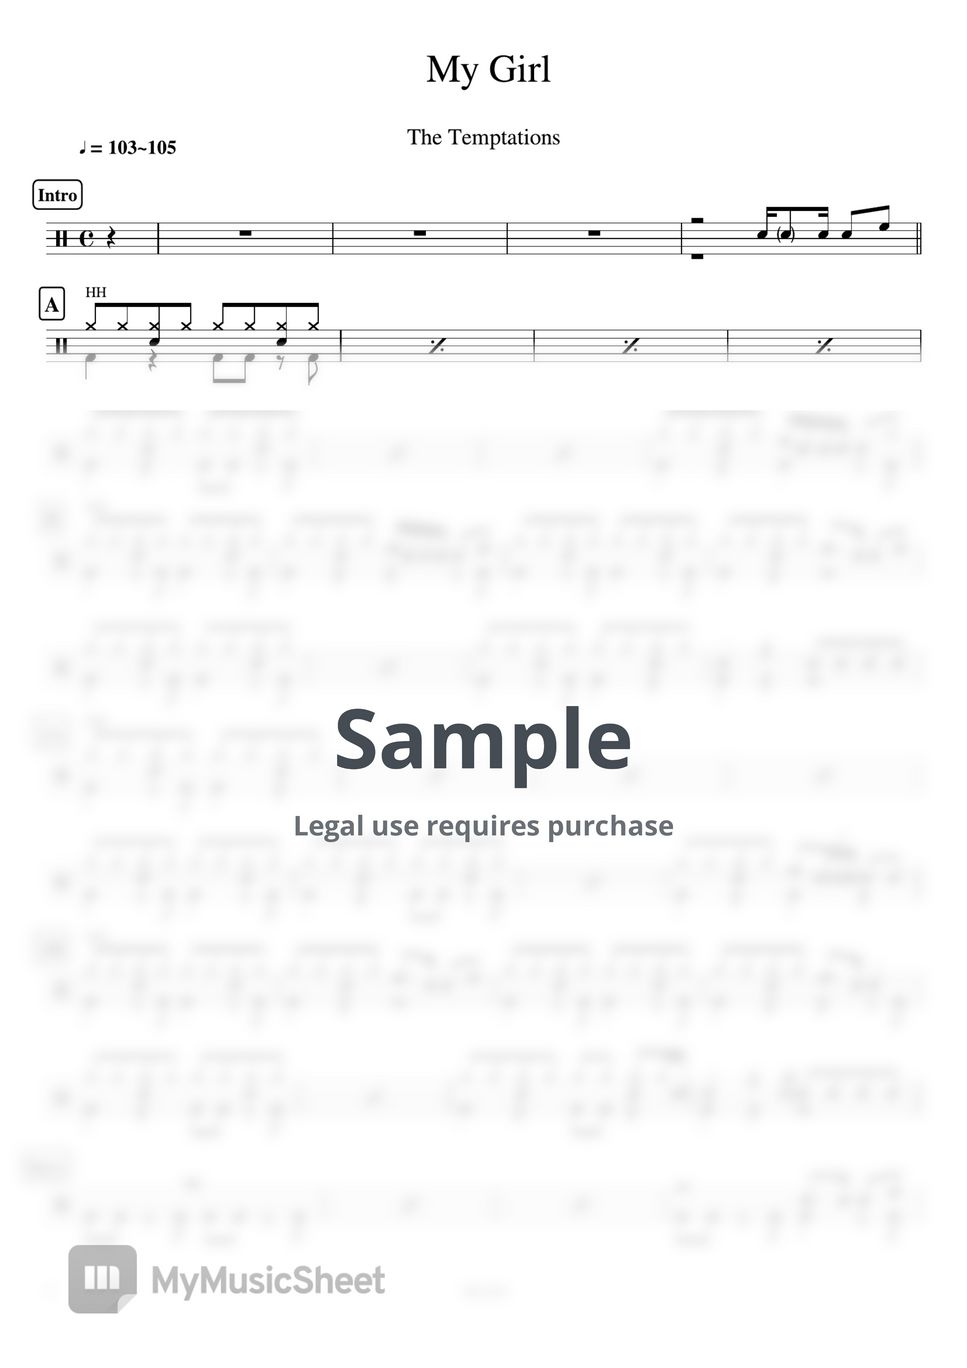 The Temptations - My Girl by Cookai's J-pop Drum sheet music!!!